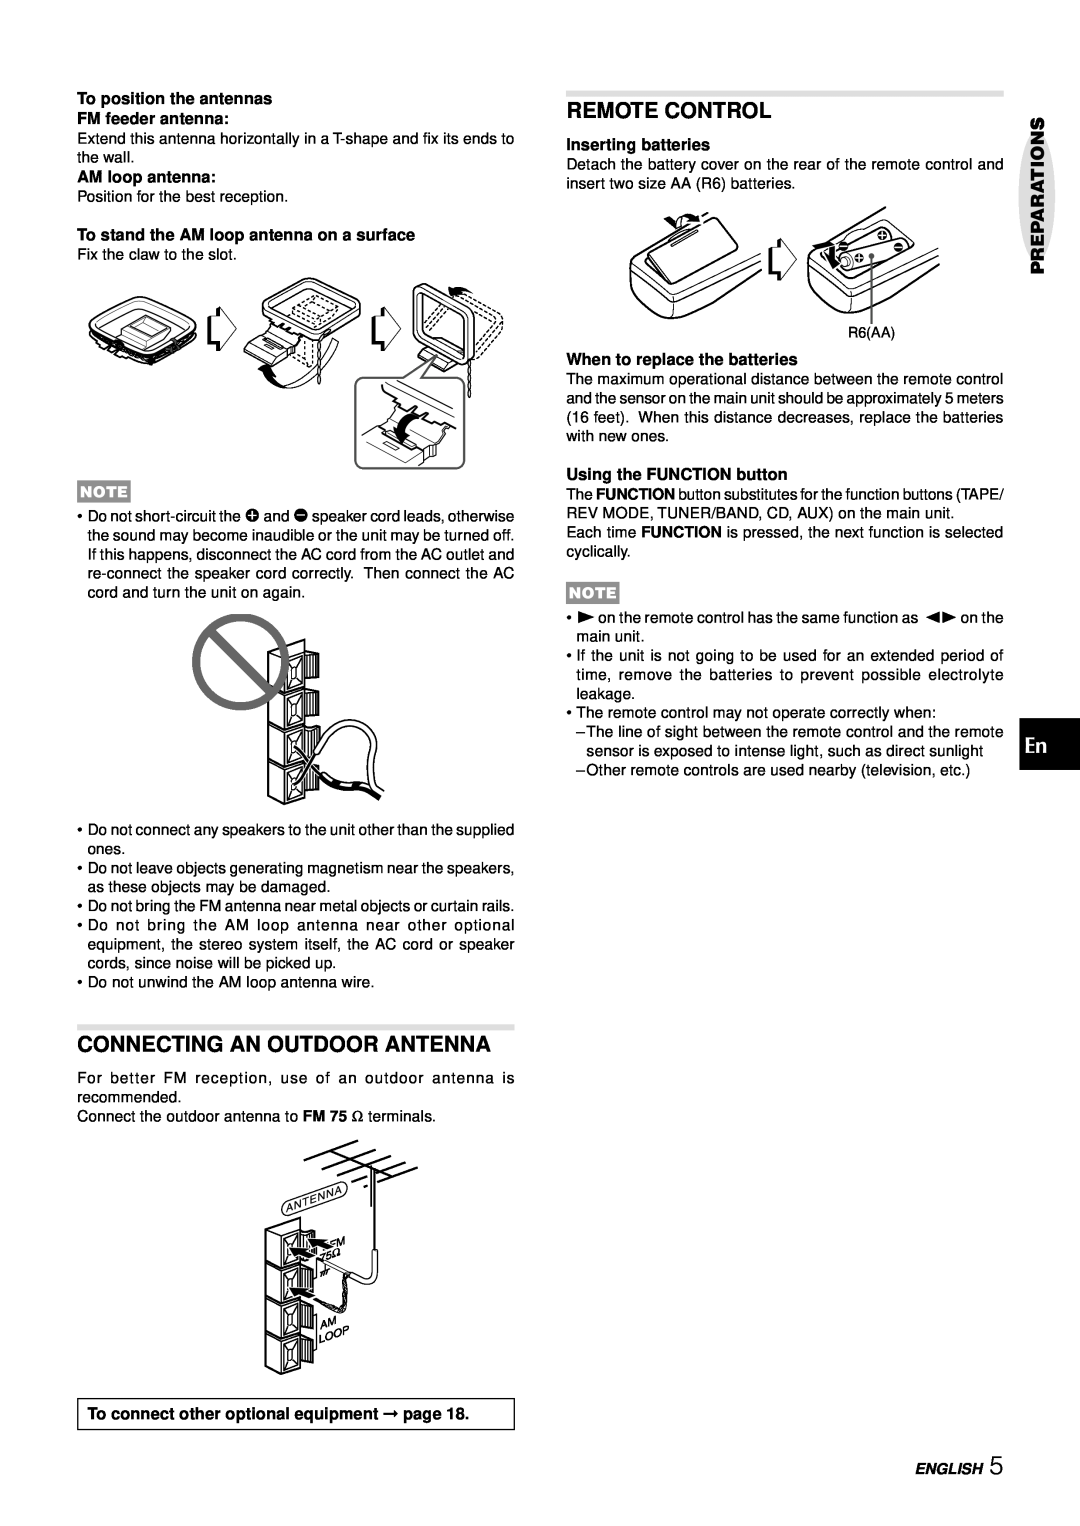 Aiwa LCX-357 Connecting An Outdoor Antenna, Remote Control, To position the antennas FM feeder antenna, AM loop antenna 